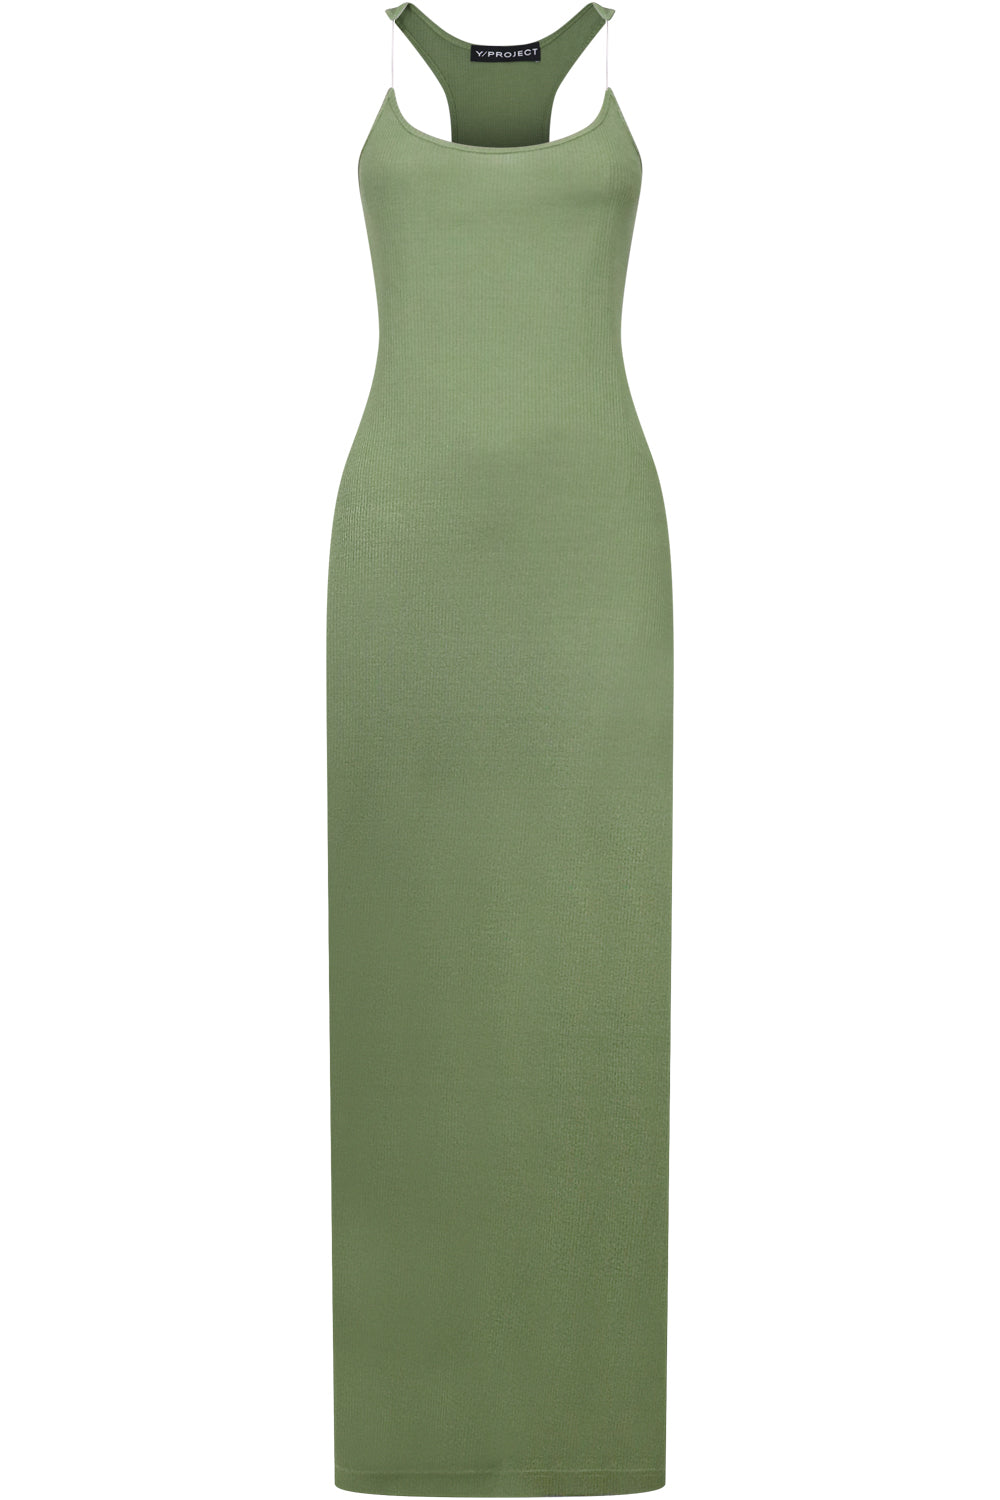 Y/PROJECT RTW INVISIBLE STRAP DRESS | OLIVE